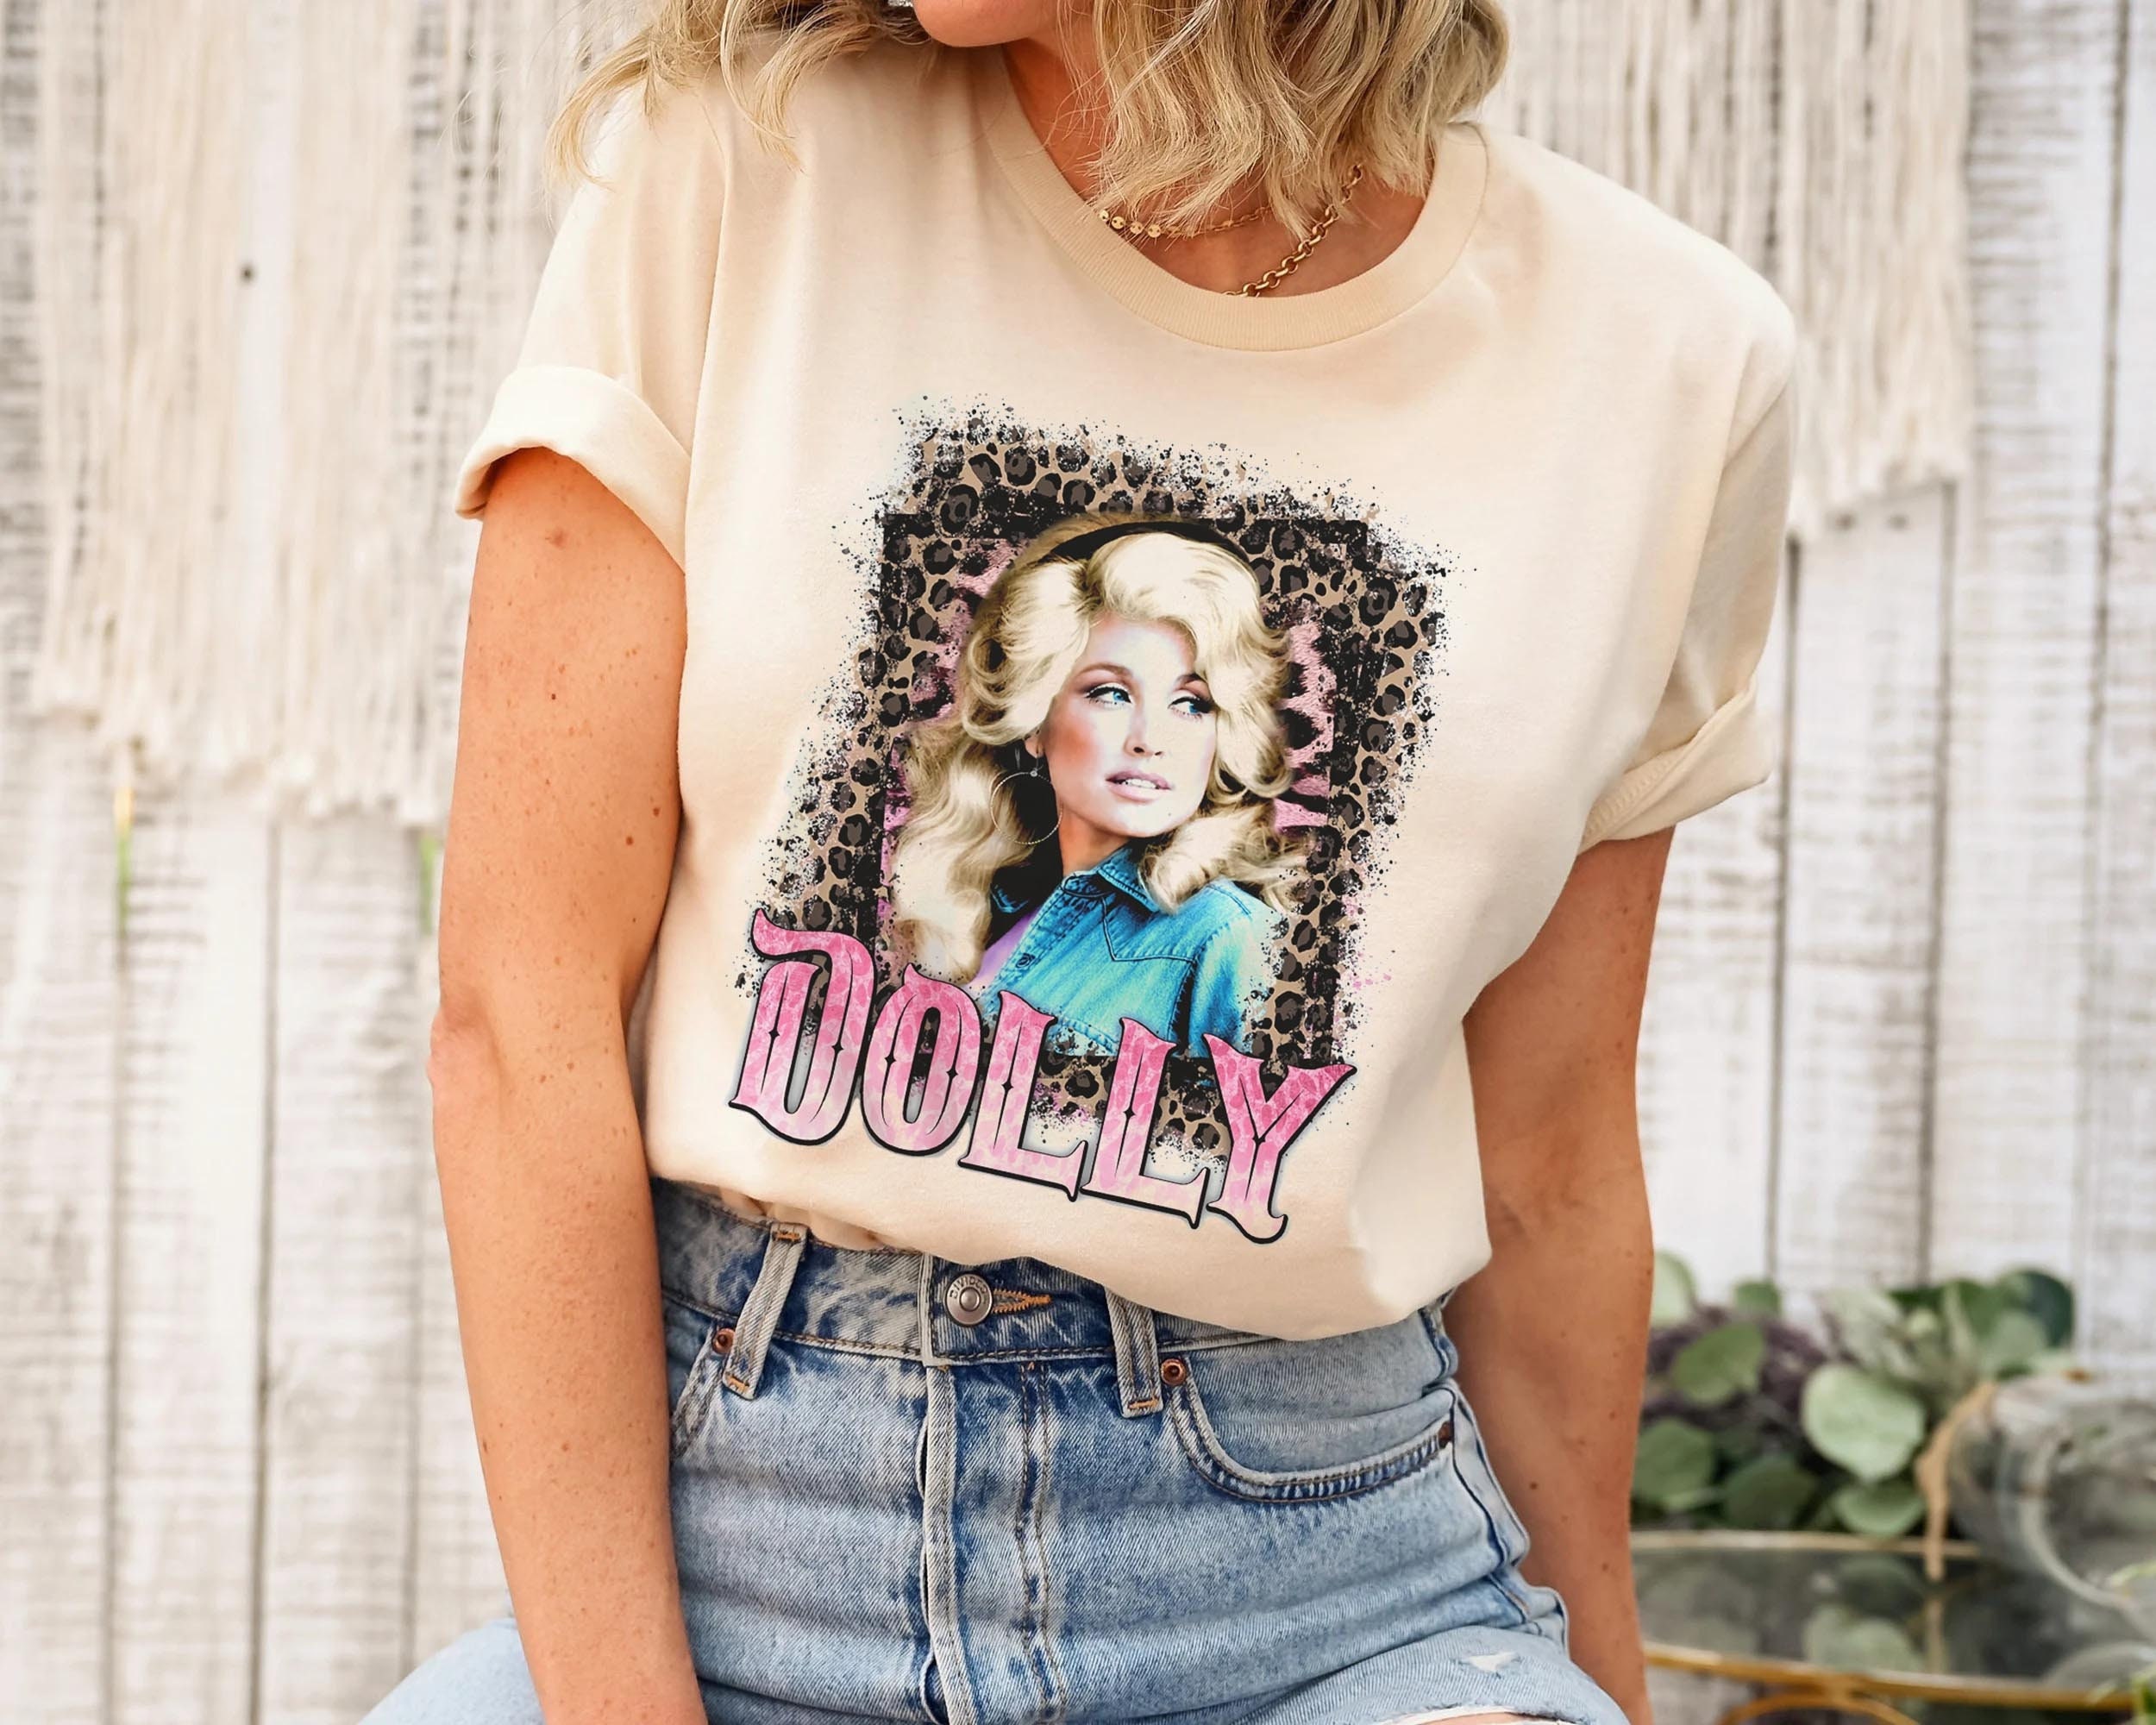 Discover Dolly Parton Tshirt, Leopard Dolly Shirt, Vintage Retro 90's Dolly Parton 1994 Shirt, Dolly Inspired Tee